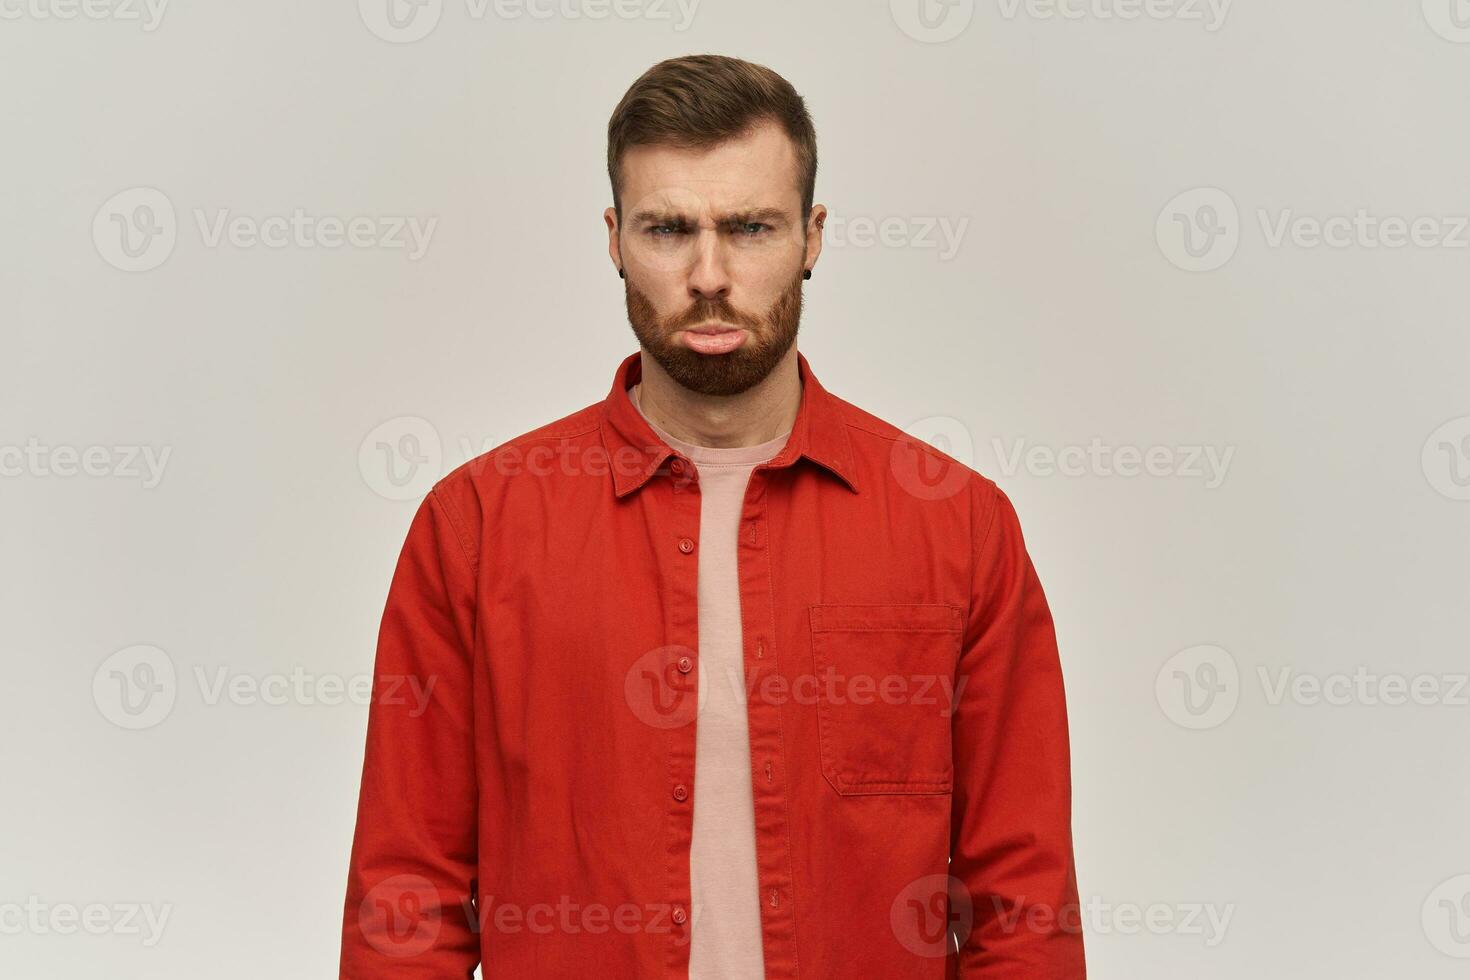 Sad amusing young man in red shirt with beard looks offended and making funny face over white background photo